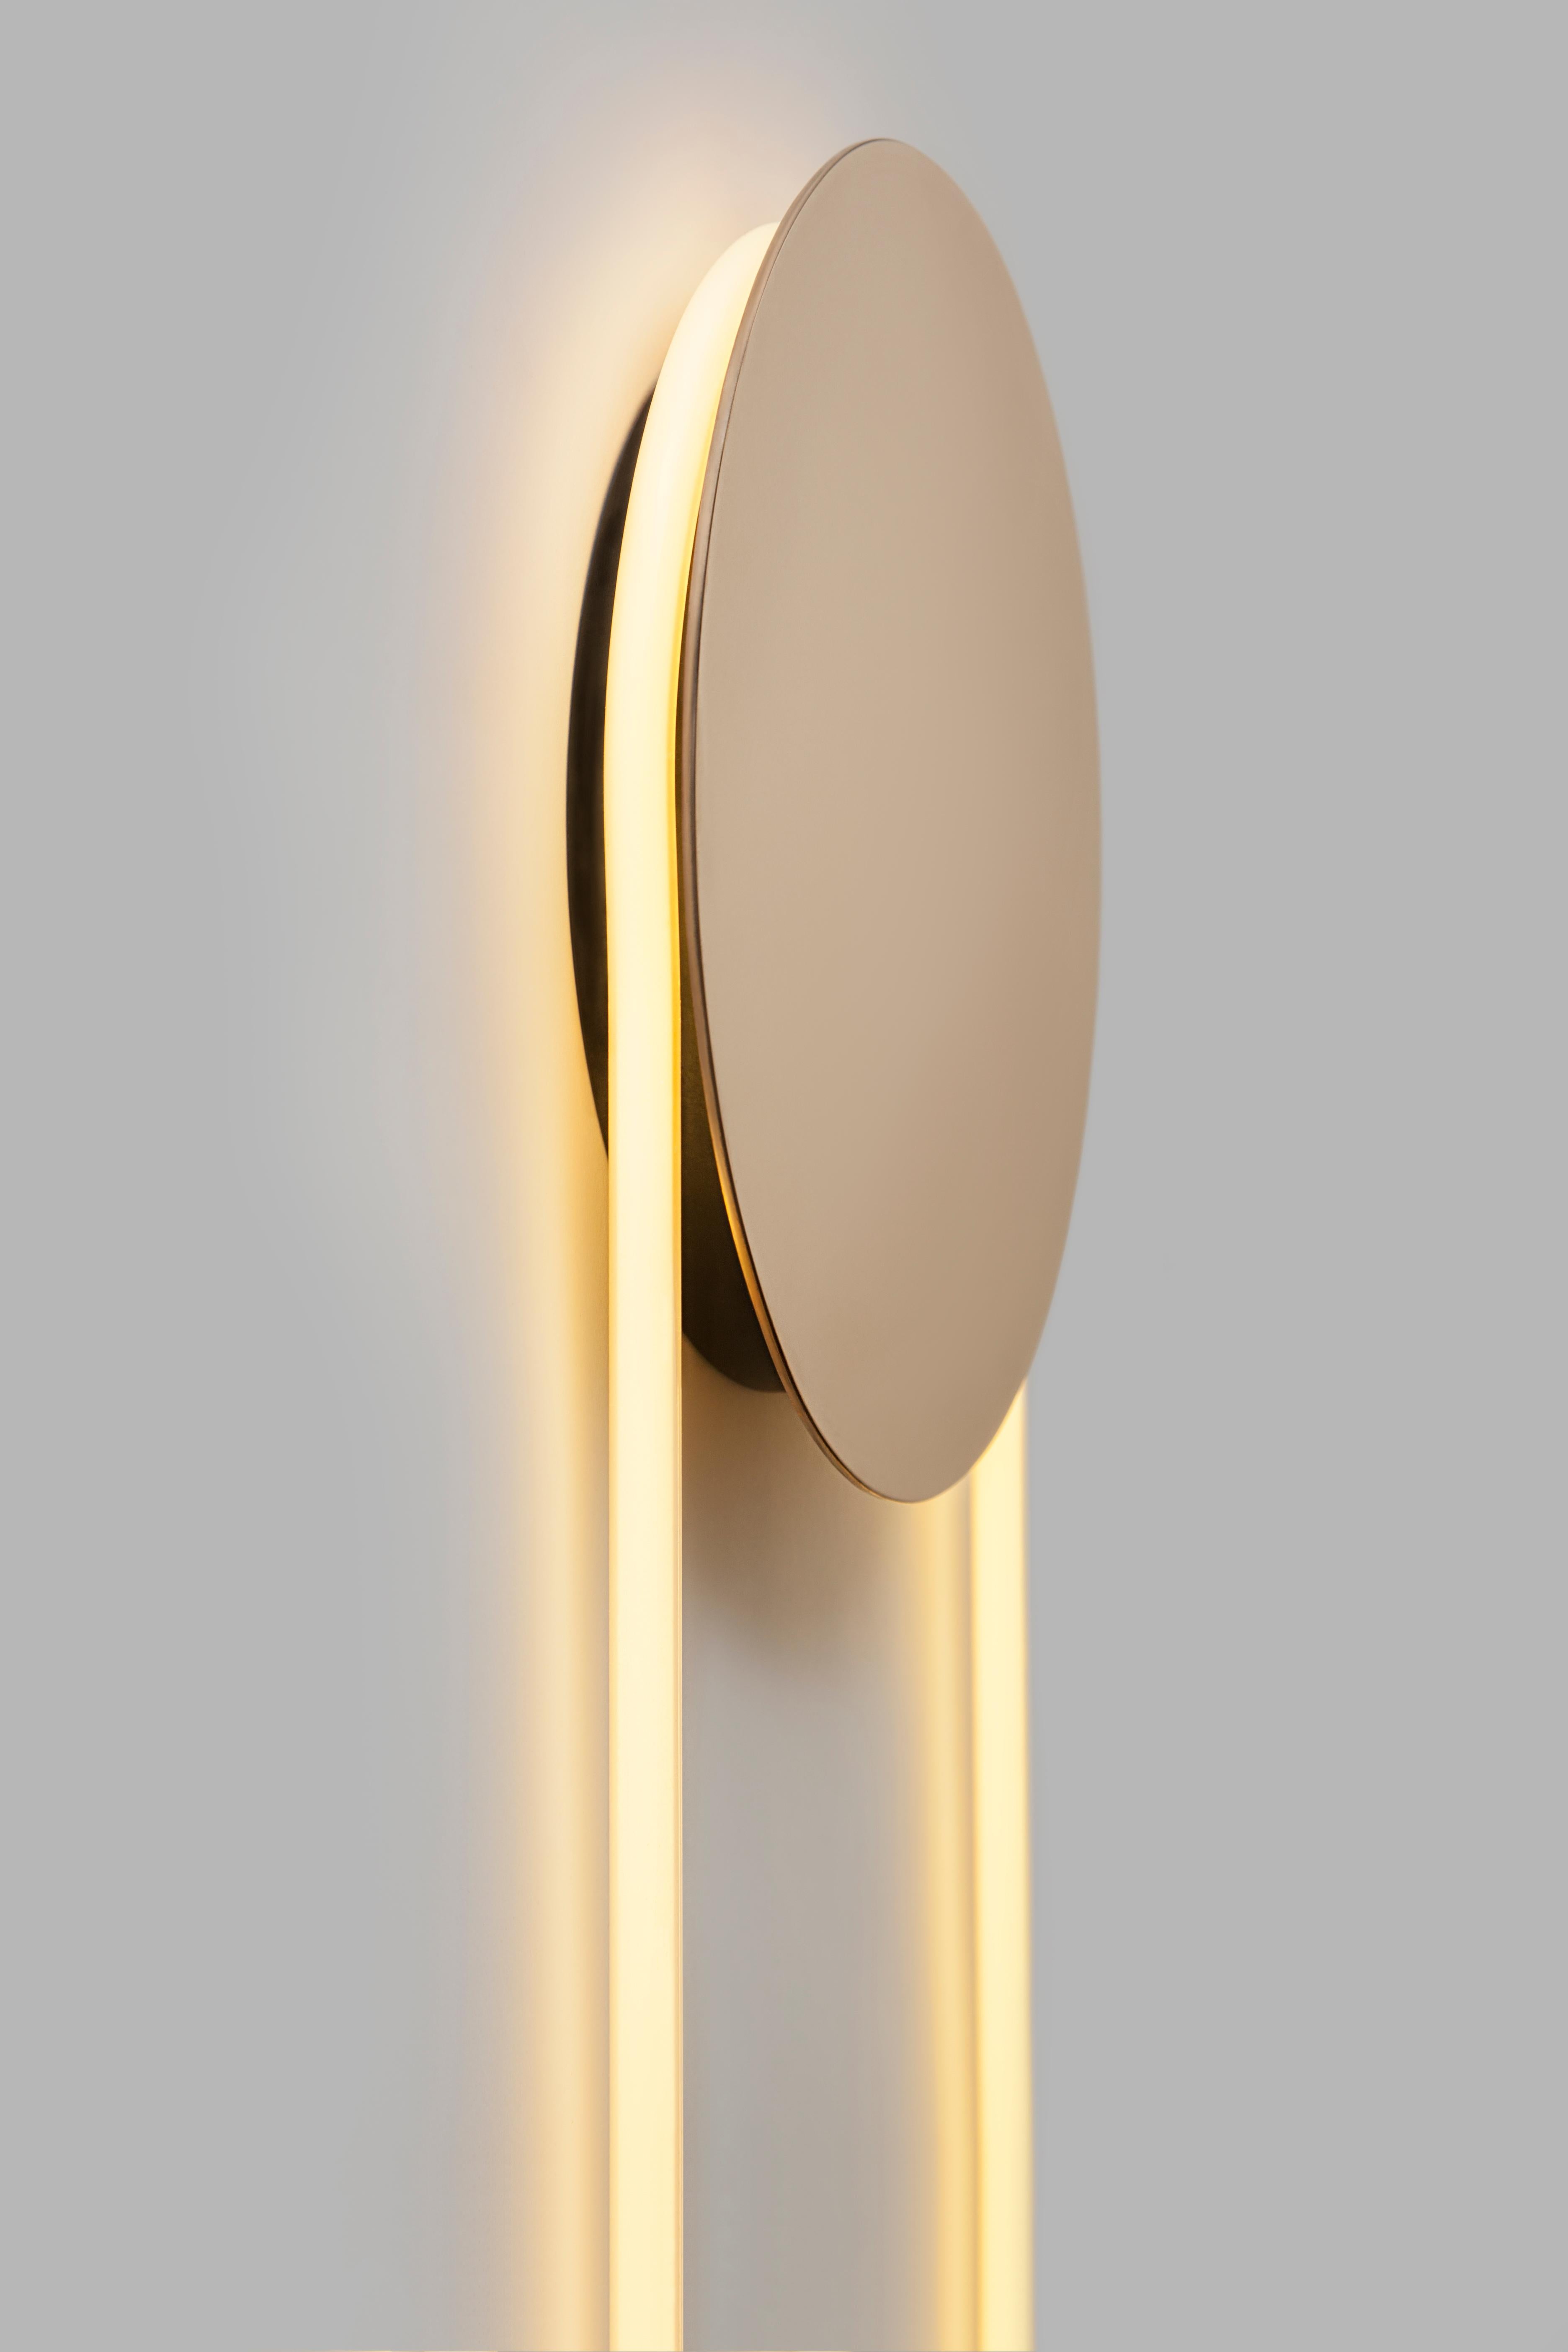 RA wall participates in its surroundings by playing with contrasts, shadows and reflections. The circular neon tube emits a bright light that reflects softly on the wall. A solid bronze disc eclipses a part of the light and draws in the hues of the